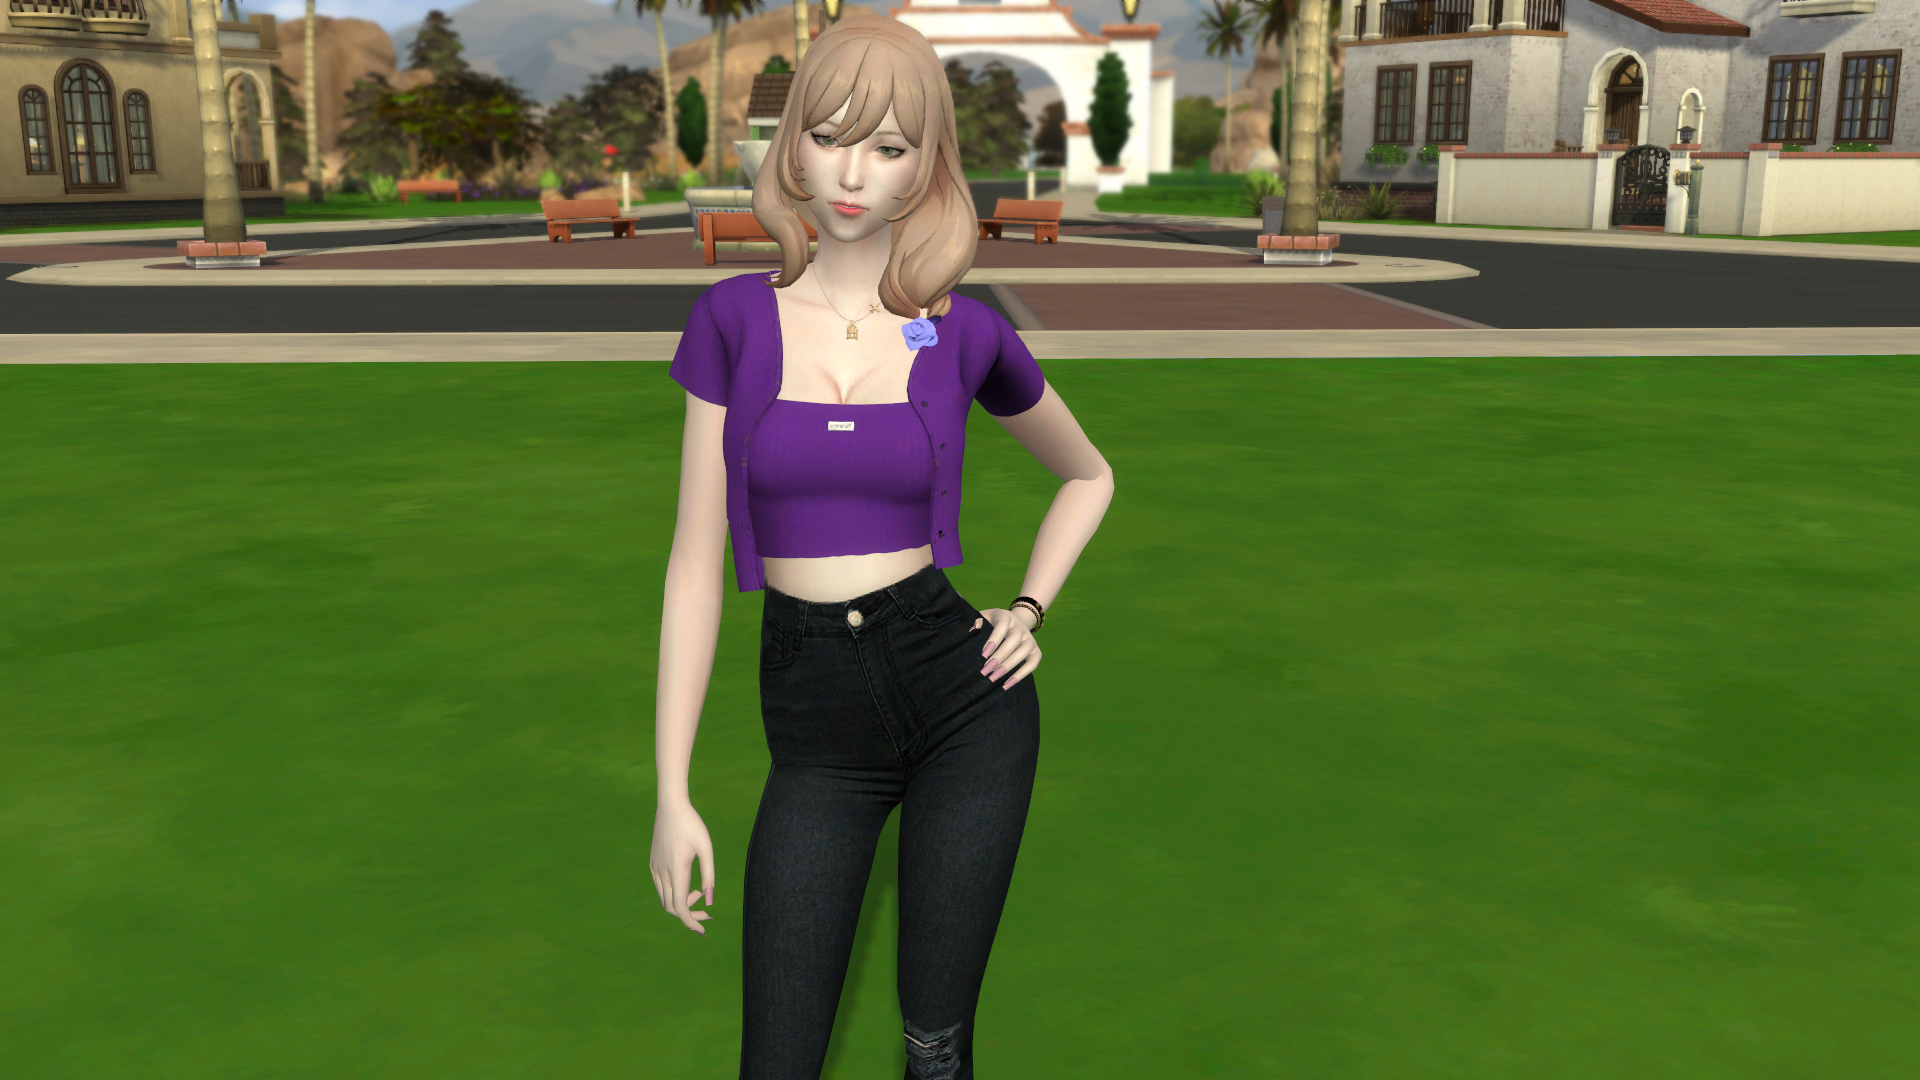 288462056_TheSims44_13_20219_41_00PM.png.031a51fa51eaef7207747c9a73f1aff0.png